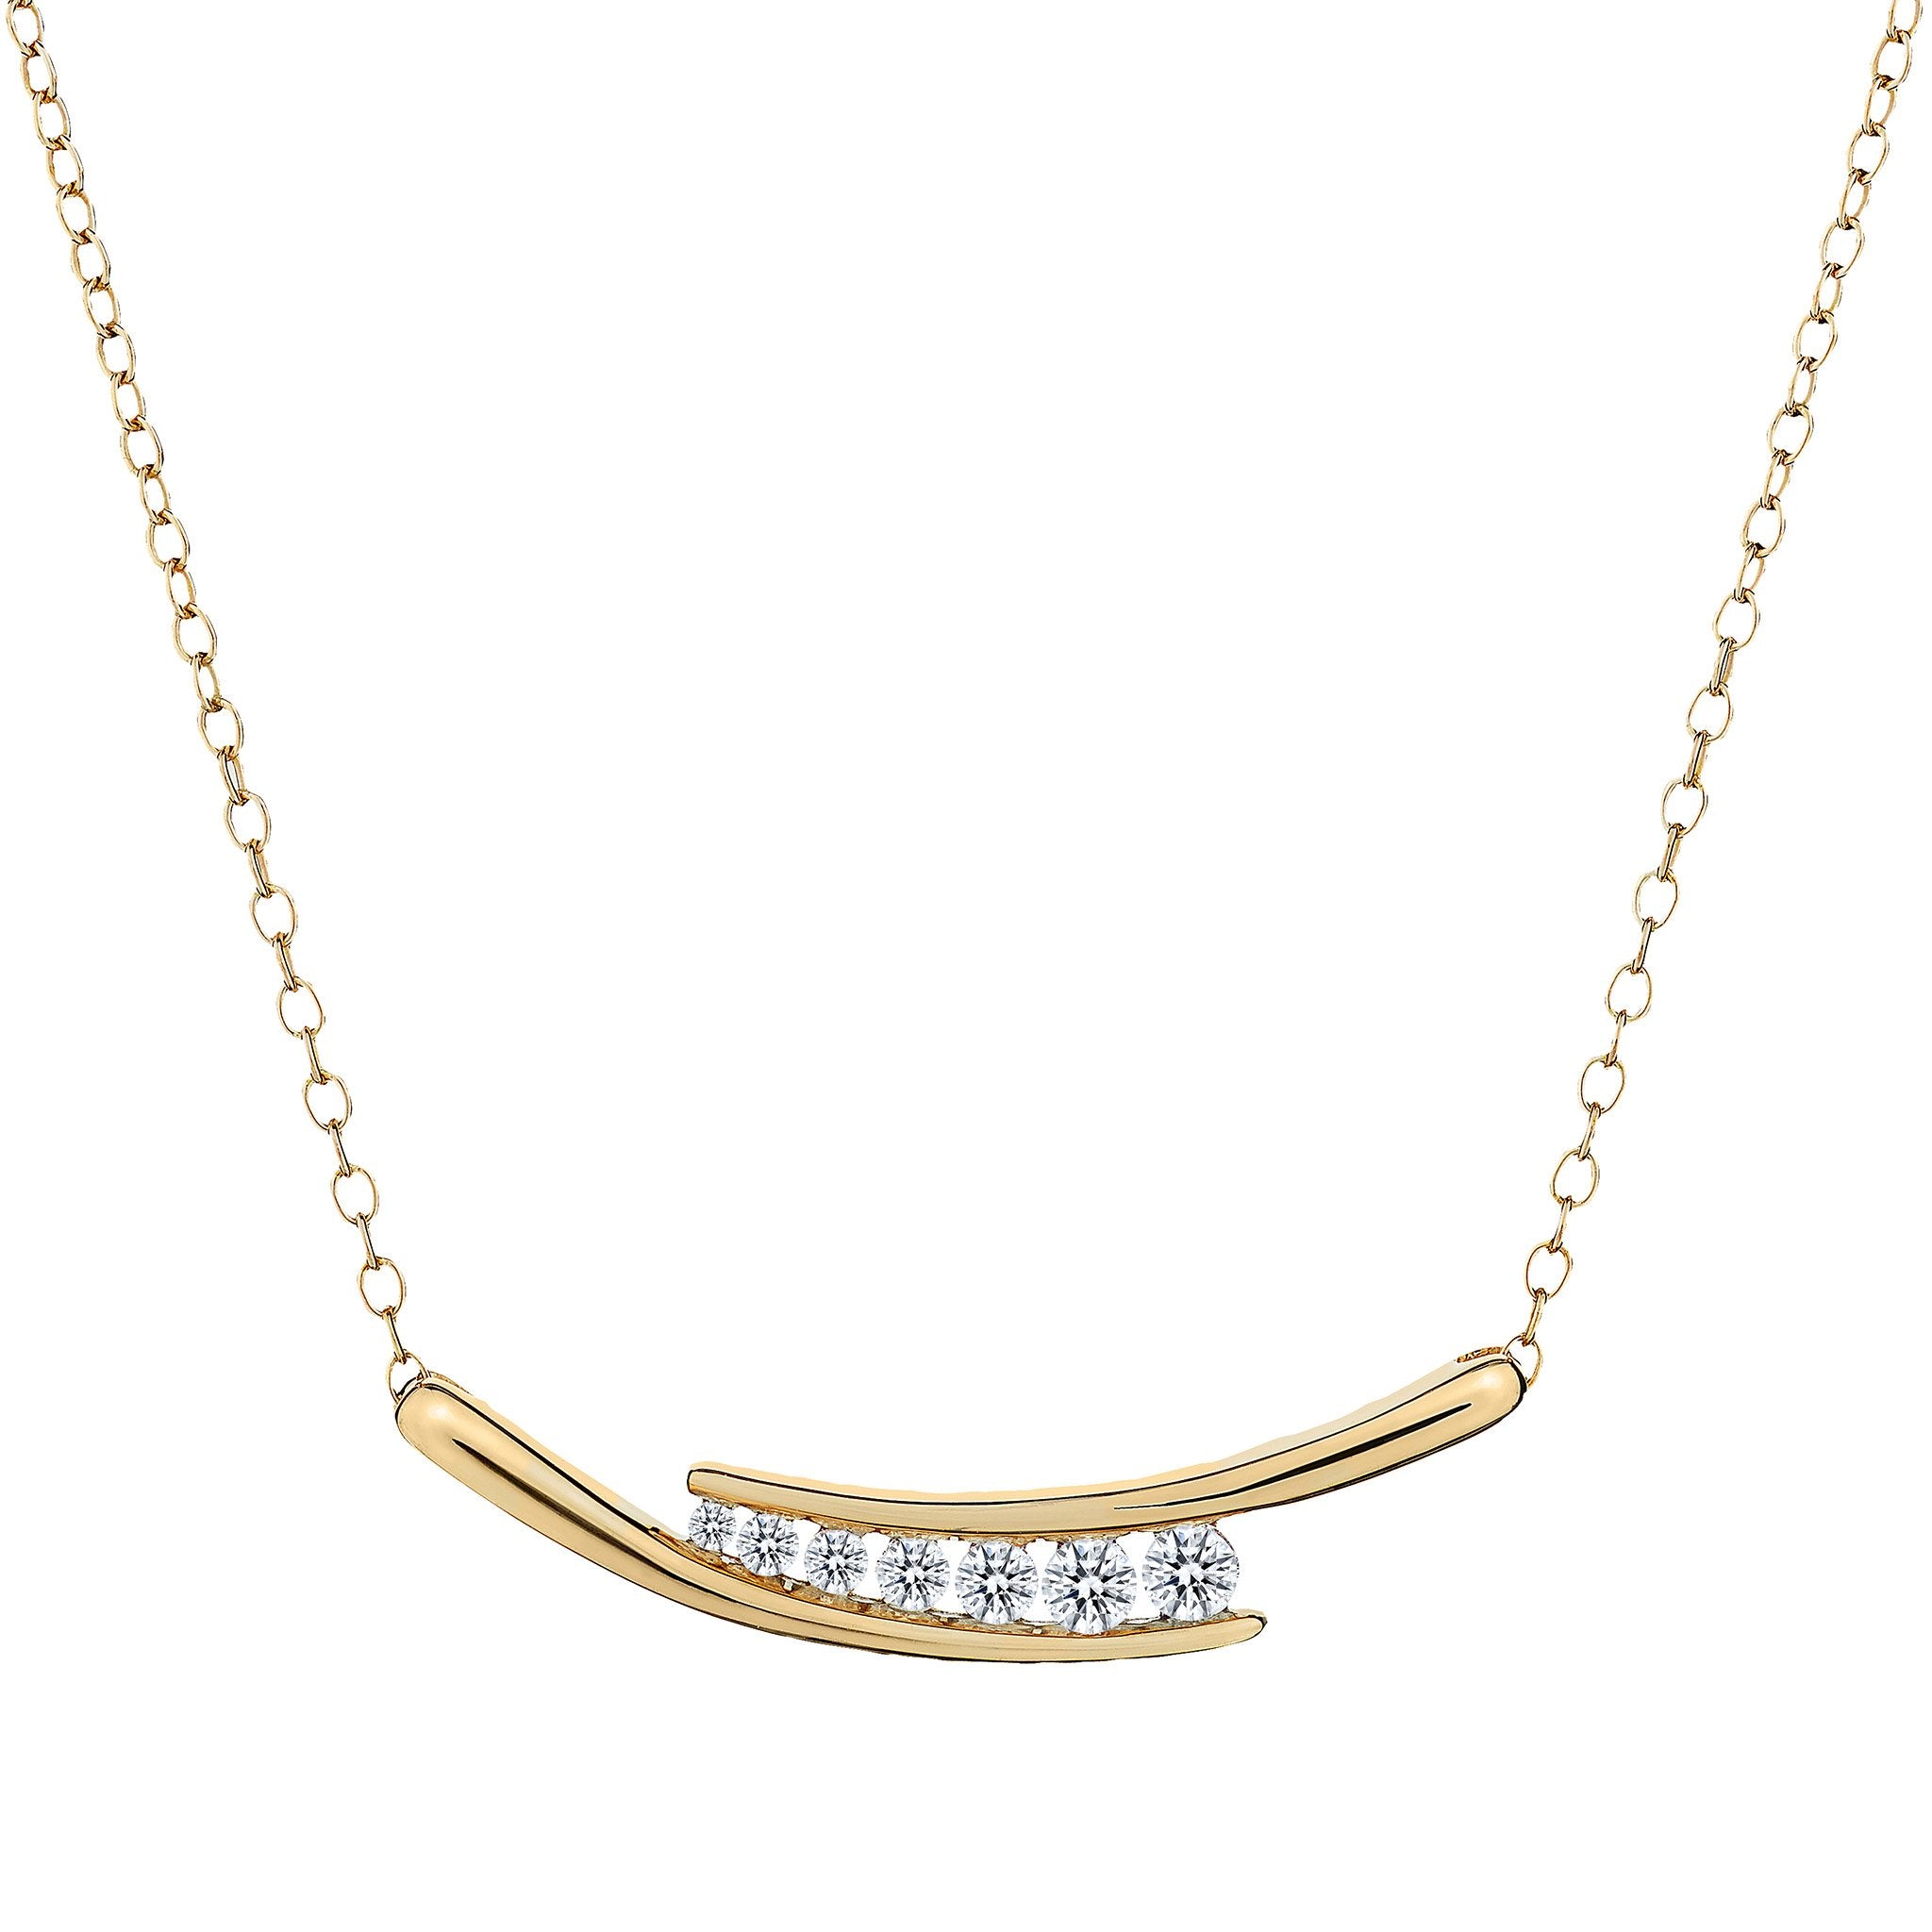 .20 Carat Diamond "Together" Necklace,  10kt Yellow Gold. Necklaces and Pendants. Griffin Jewellery Designs.